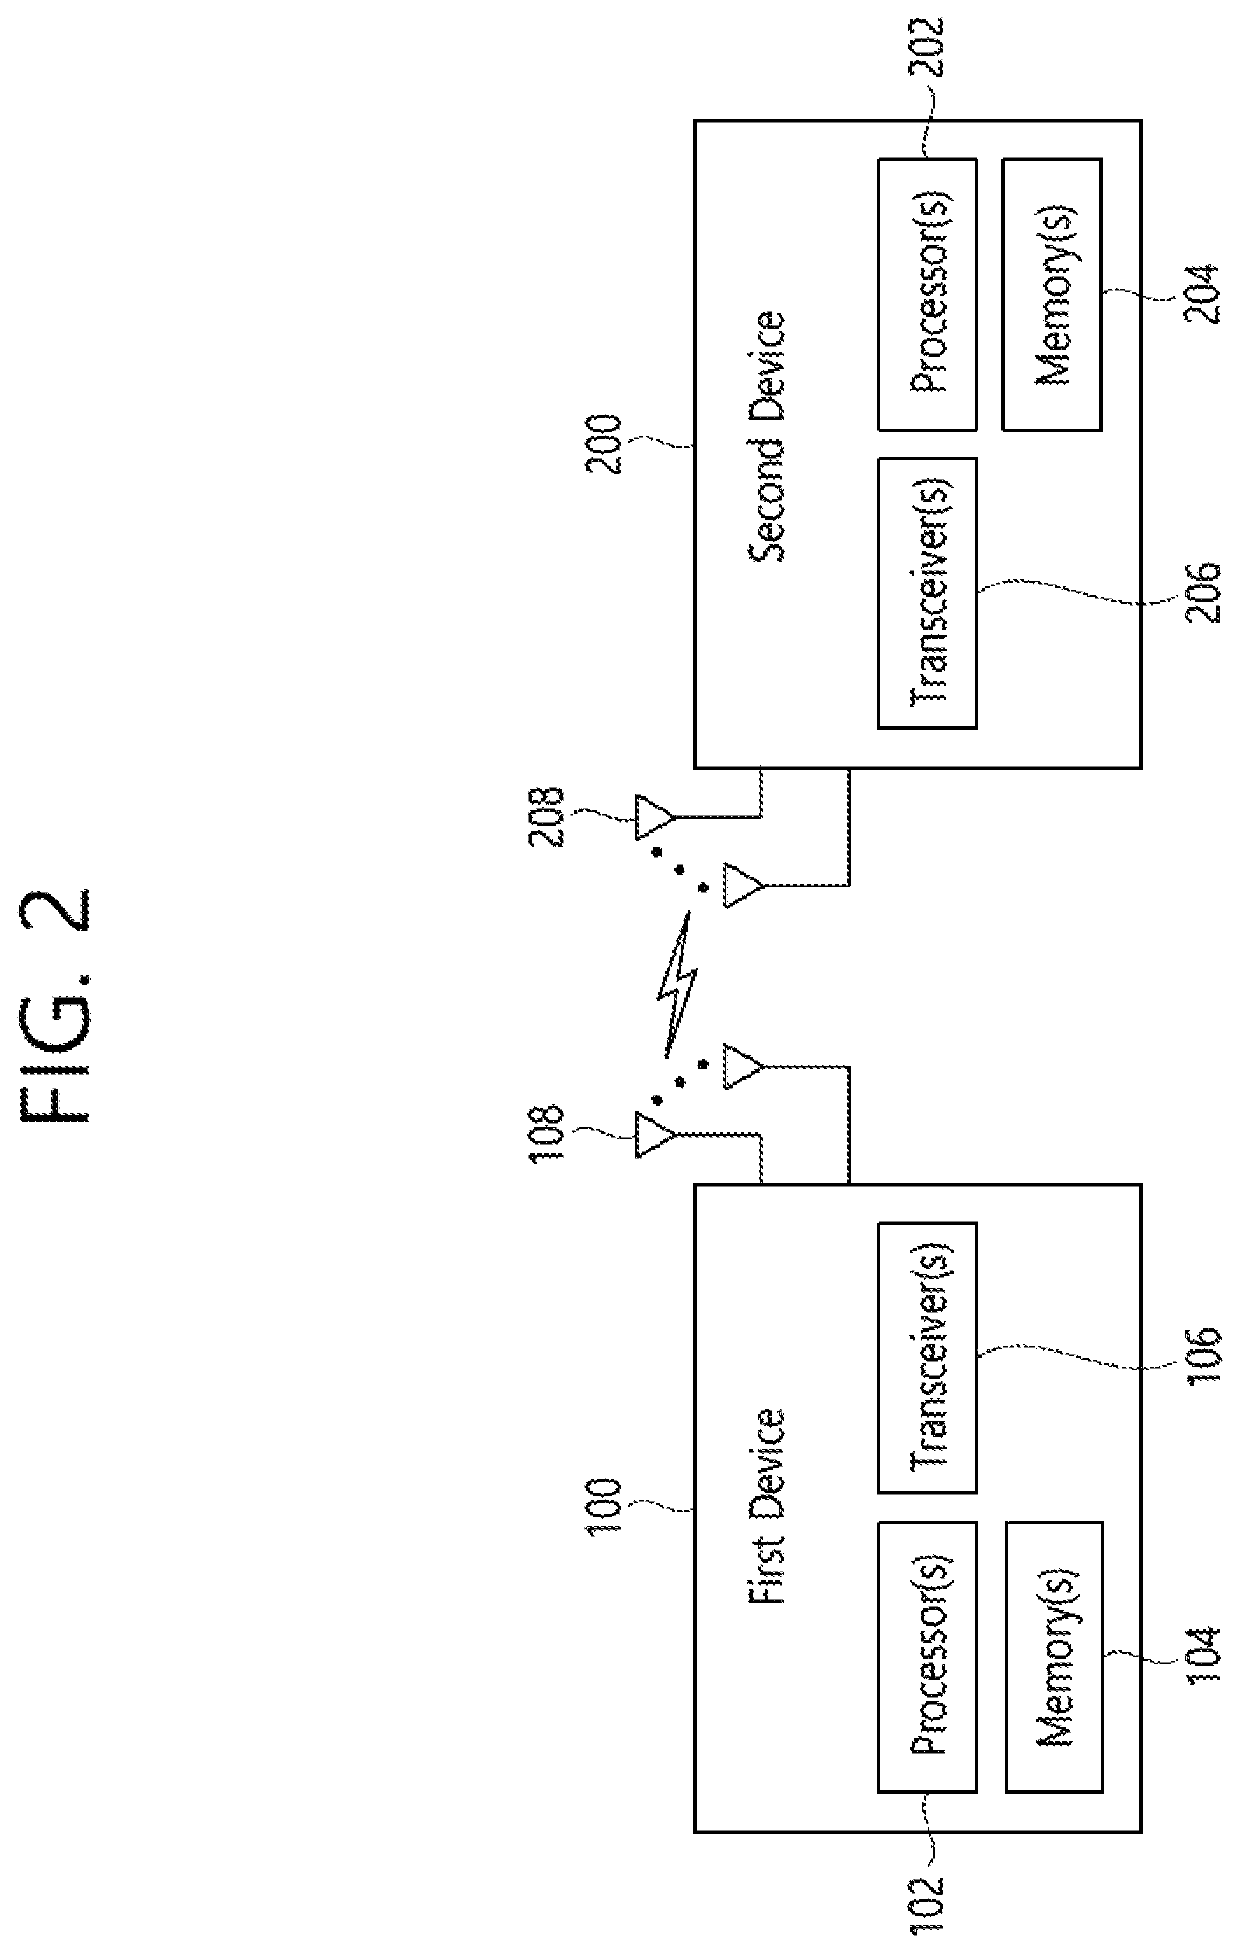 Method and apparatus for public warning system on unlicensed frequency in a wireless communication system